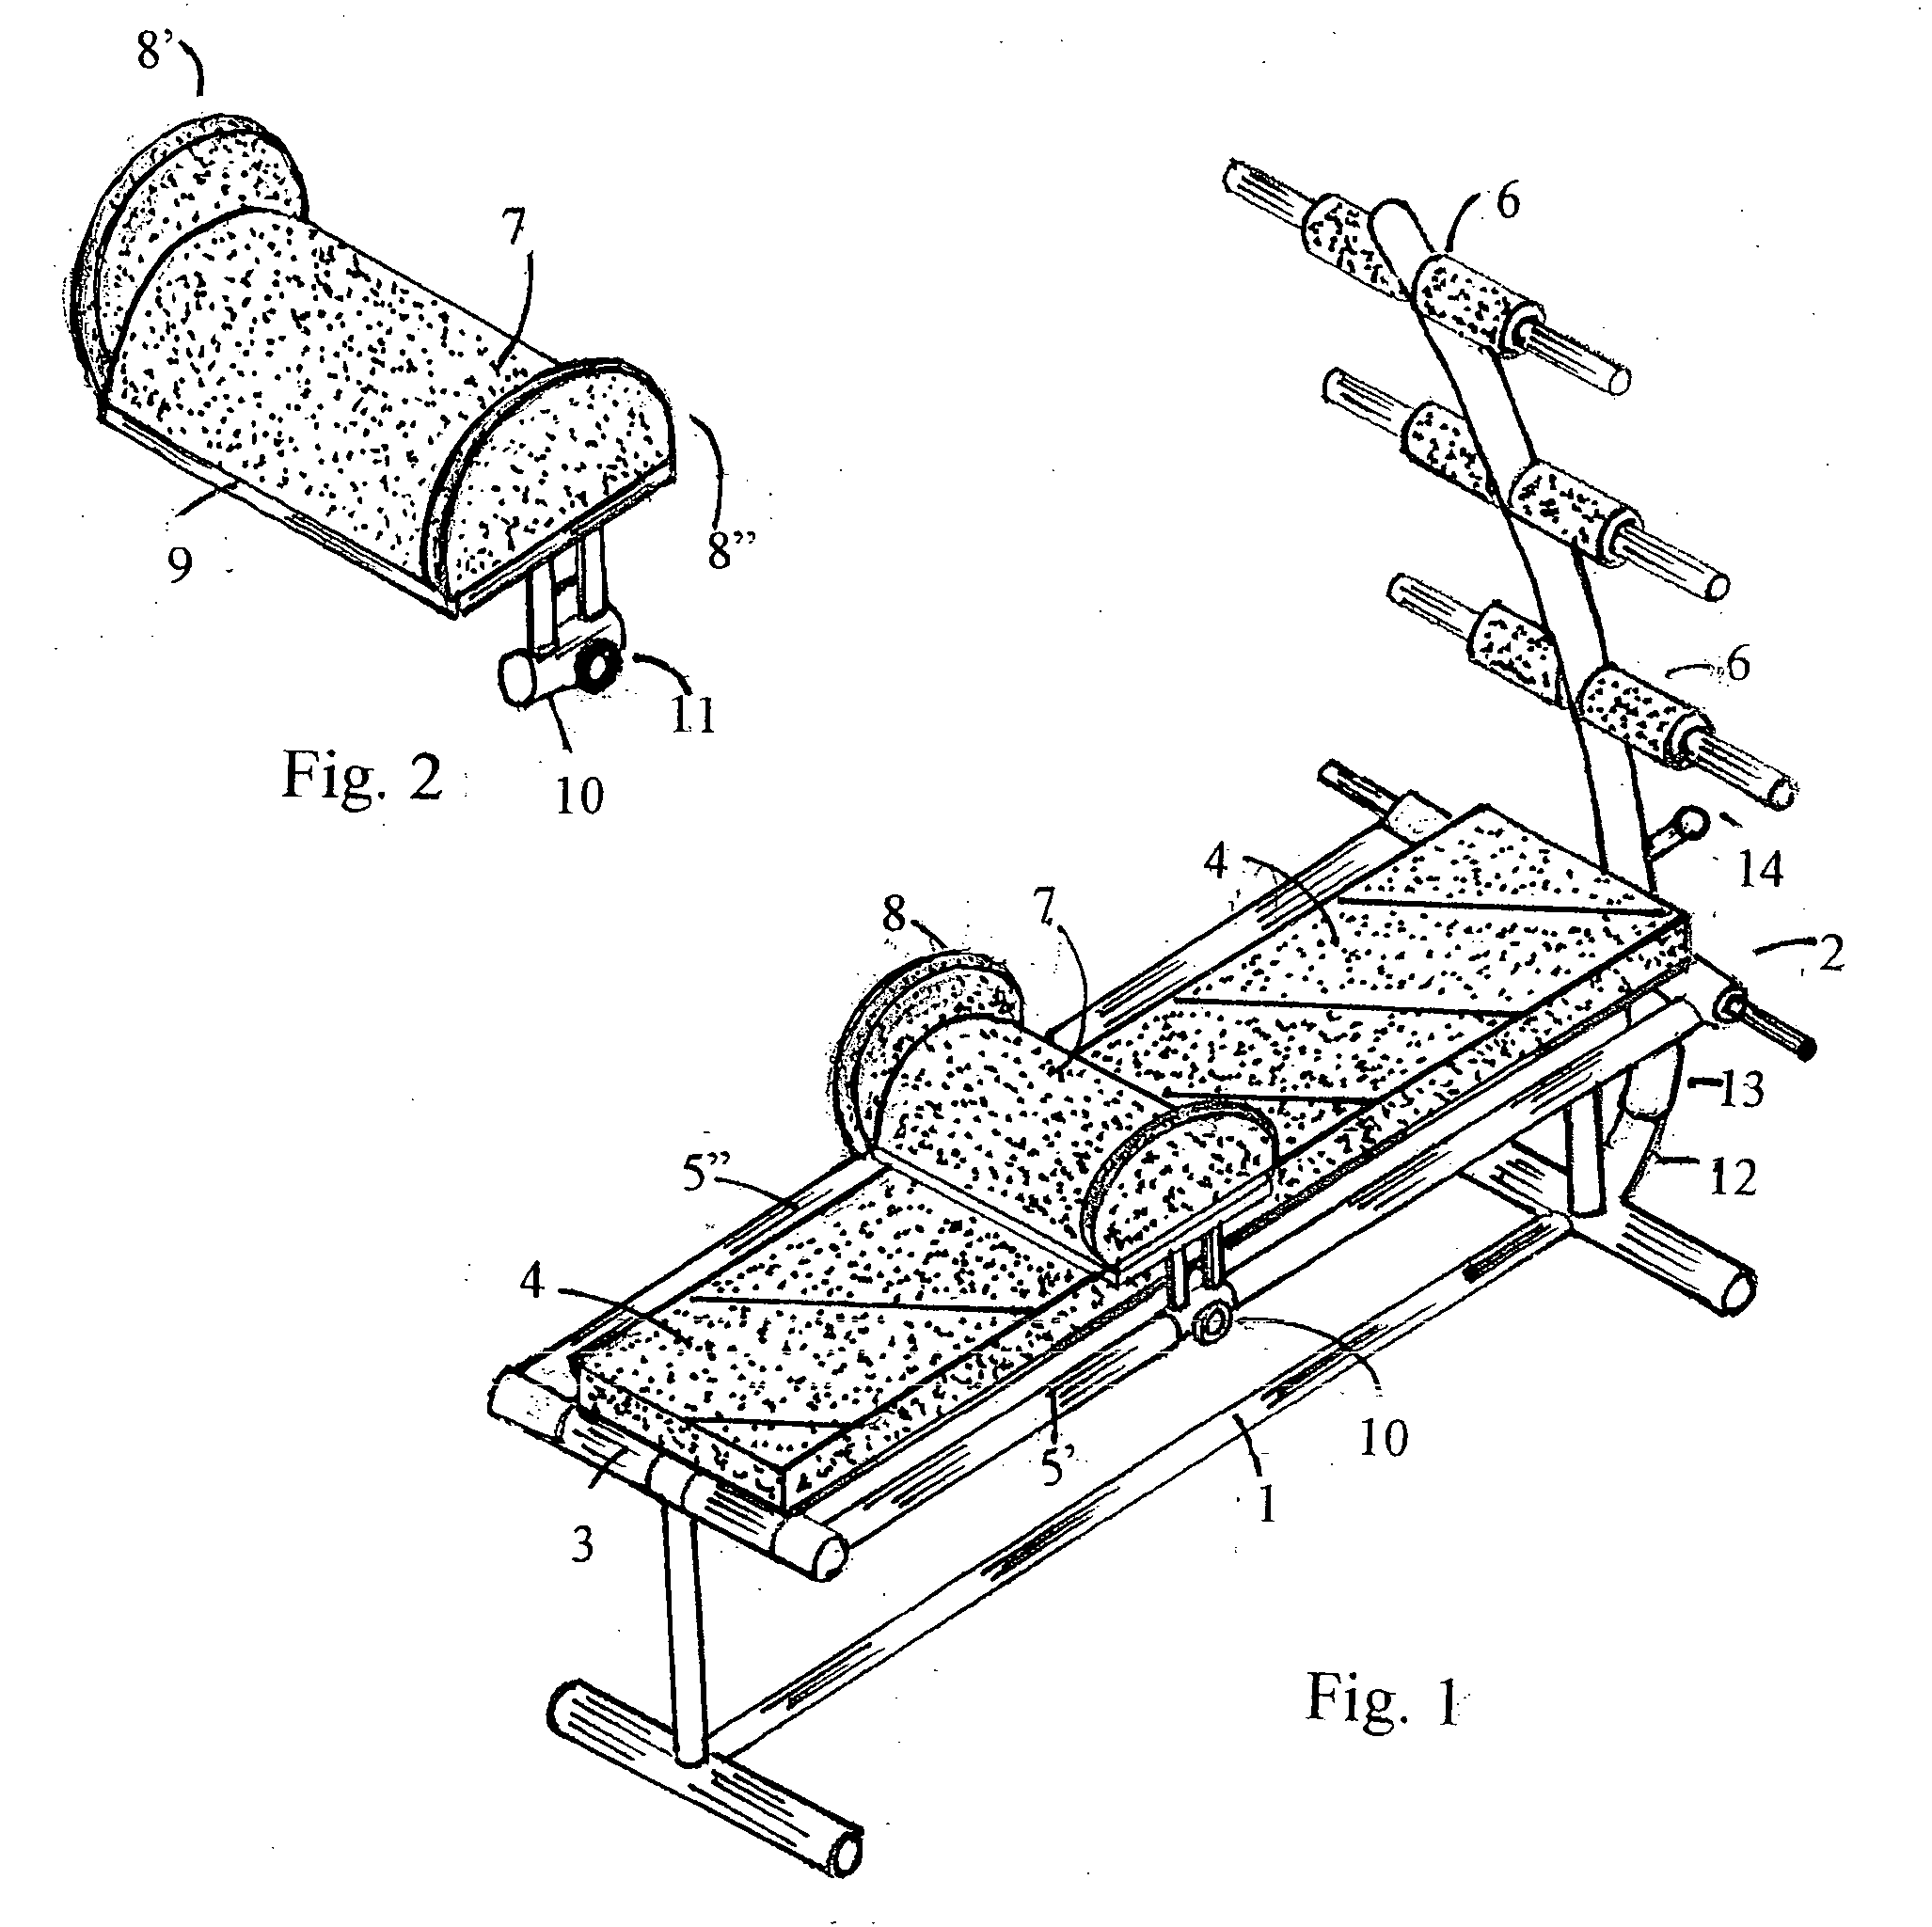 Biodynamic apparatus for performing correct SIT-UP and LEGS-UP exercises and methods